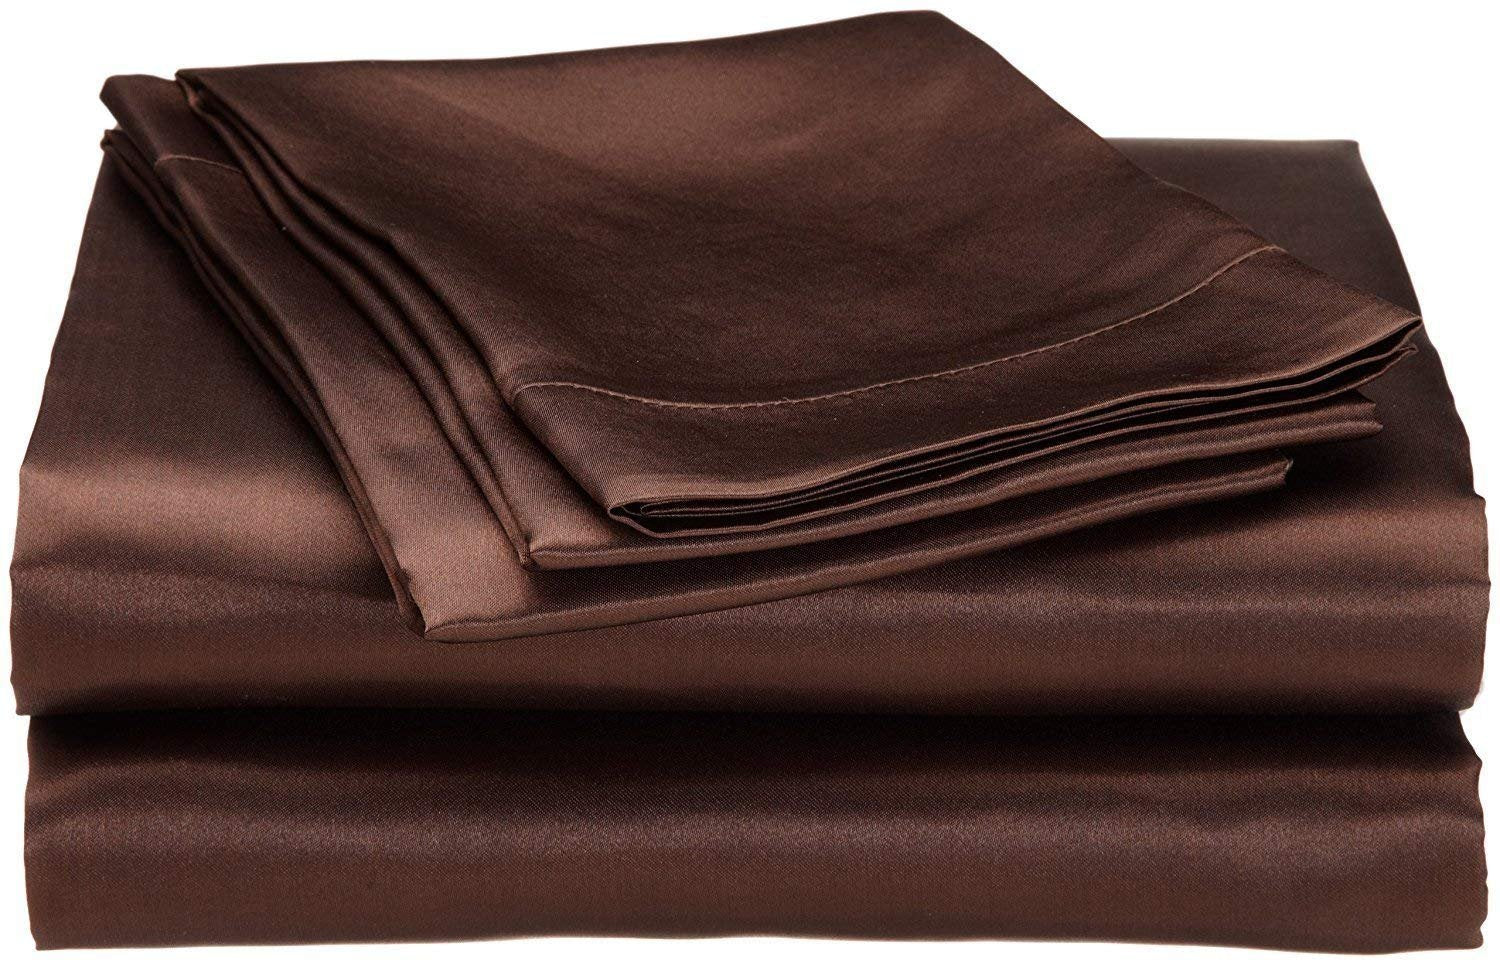 8 Inch Pocket Sheet Set Mulberry Sateen Silk Chocolate at-www.egyptianhomelinens.com